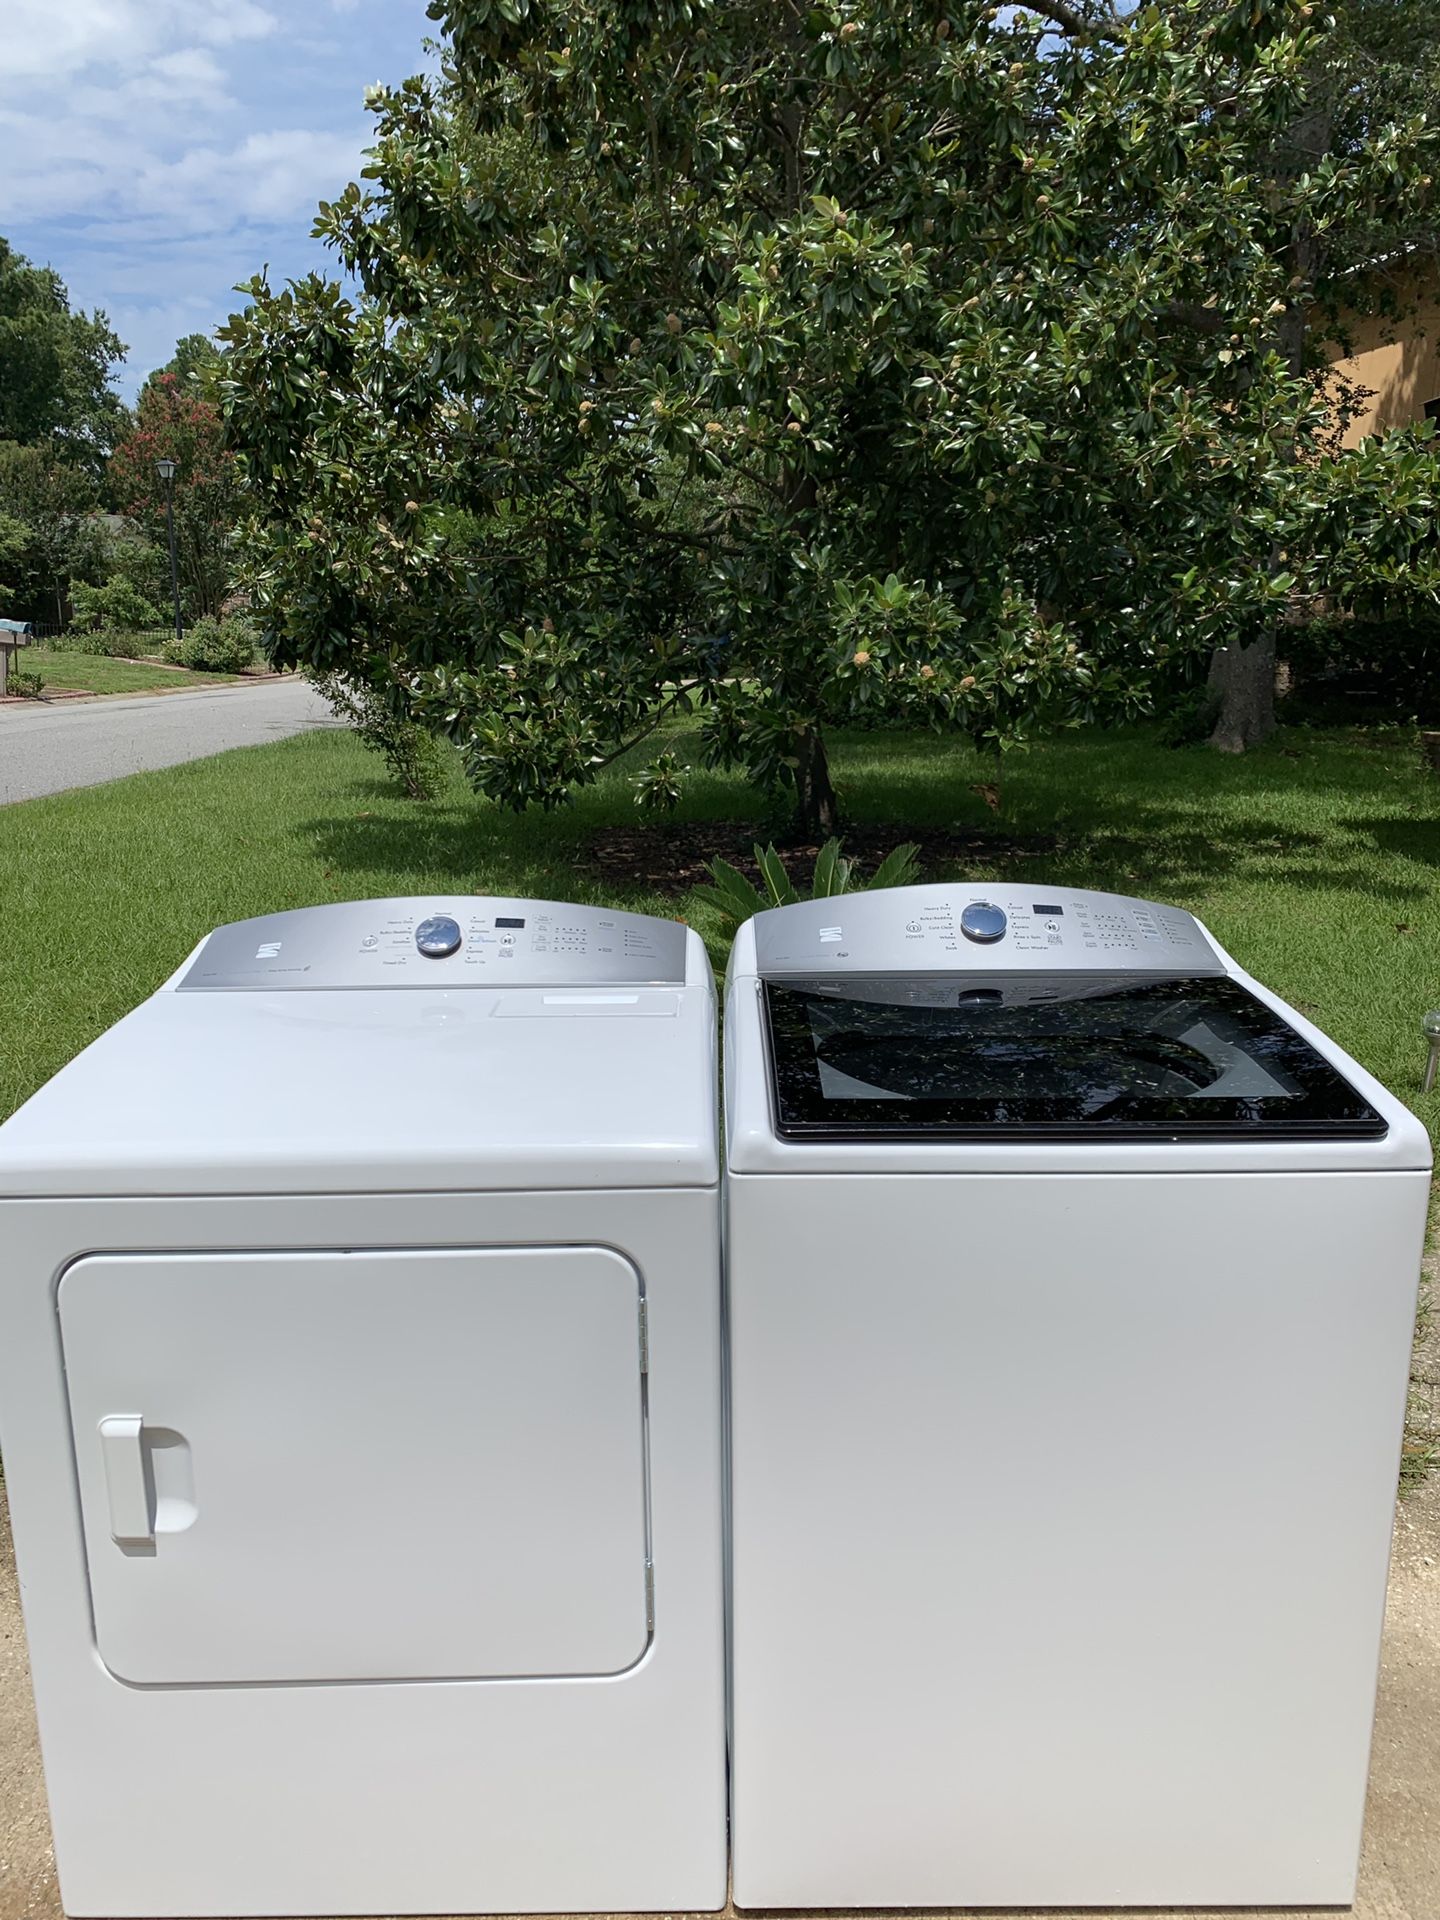 🌊 Brand New 2O19 Kenmore Washer and Dryer Set Available🌊